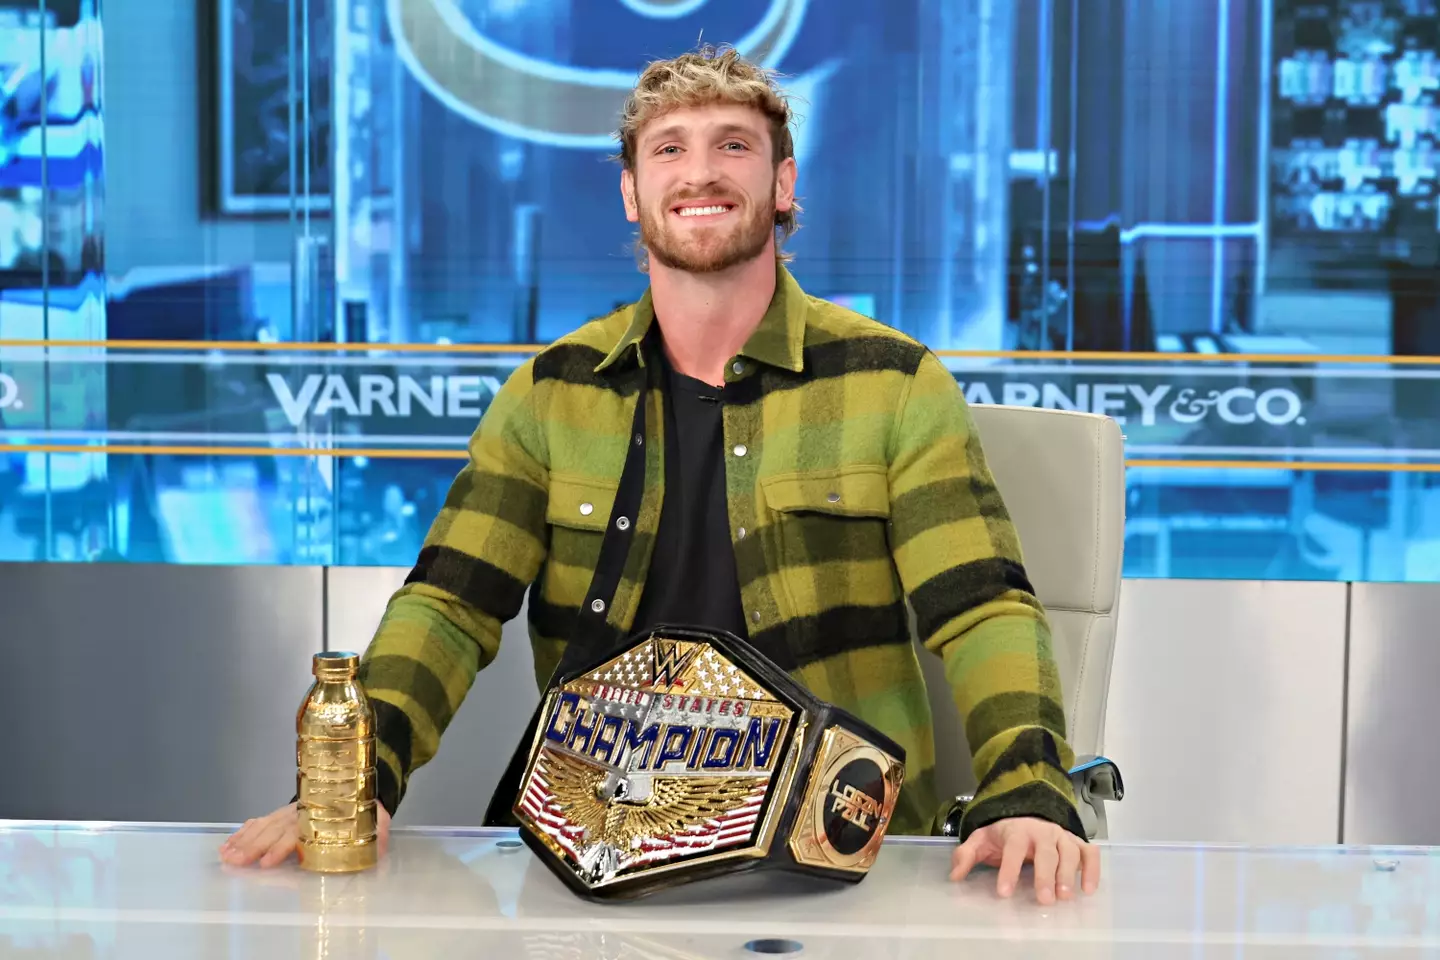 Logan Paul said his win was 'just the beginning'.